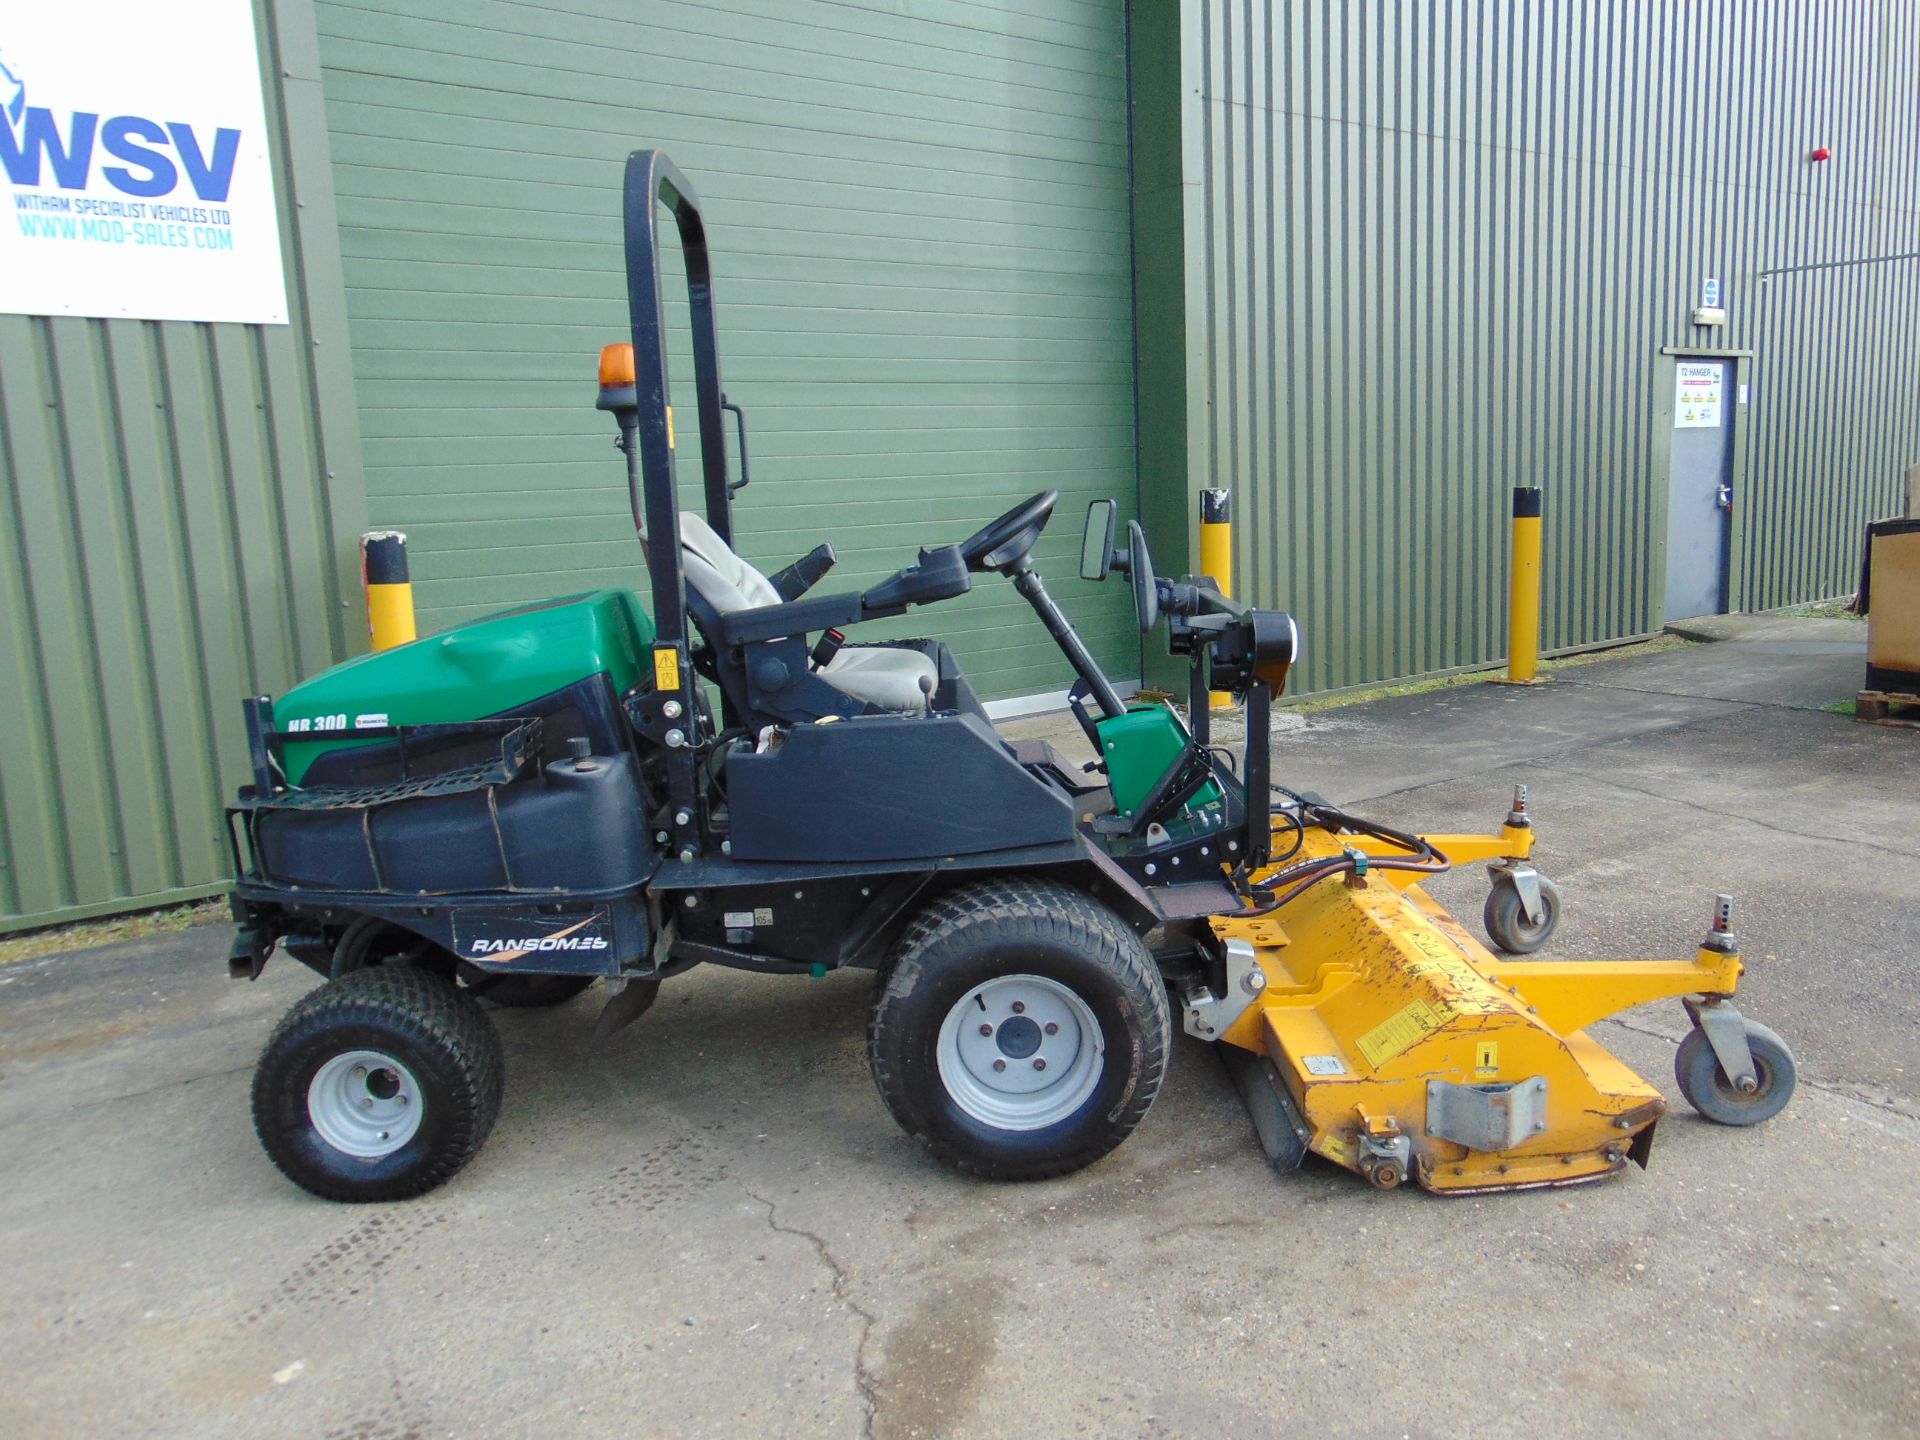 2014 Ransomes HR300 C/W Muthing Outfront Flail Mower ONLY 2,203 HOURS! - Image 8 of 26